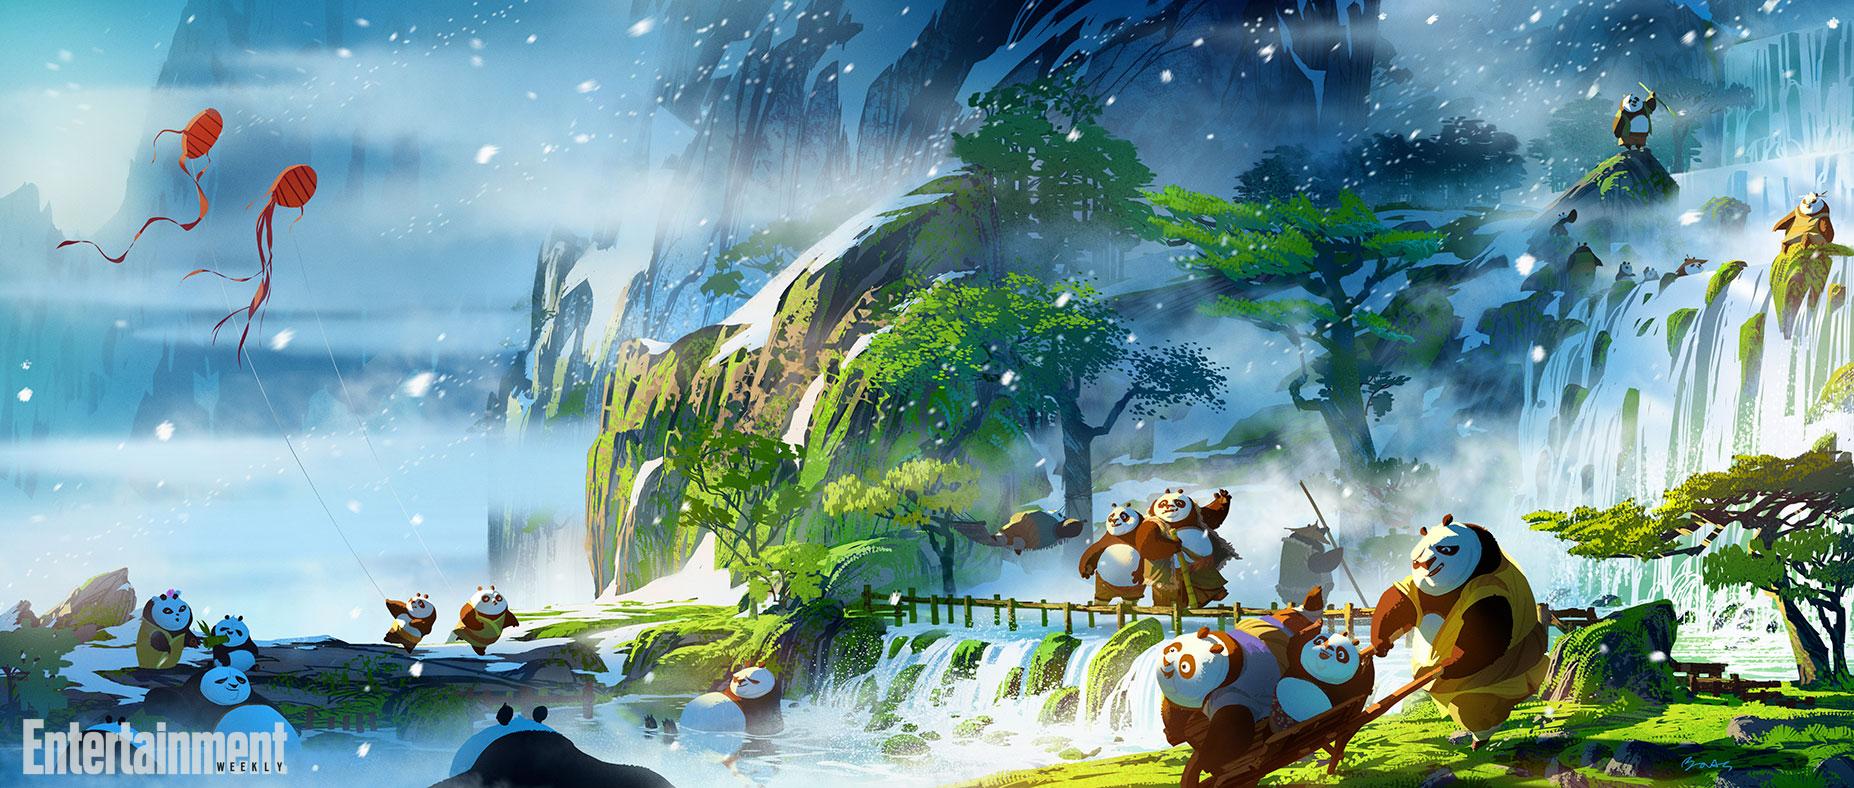 Kung Fu Panda Exclusive See Concept Art And Cinemagraphs Of